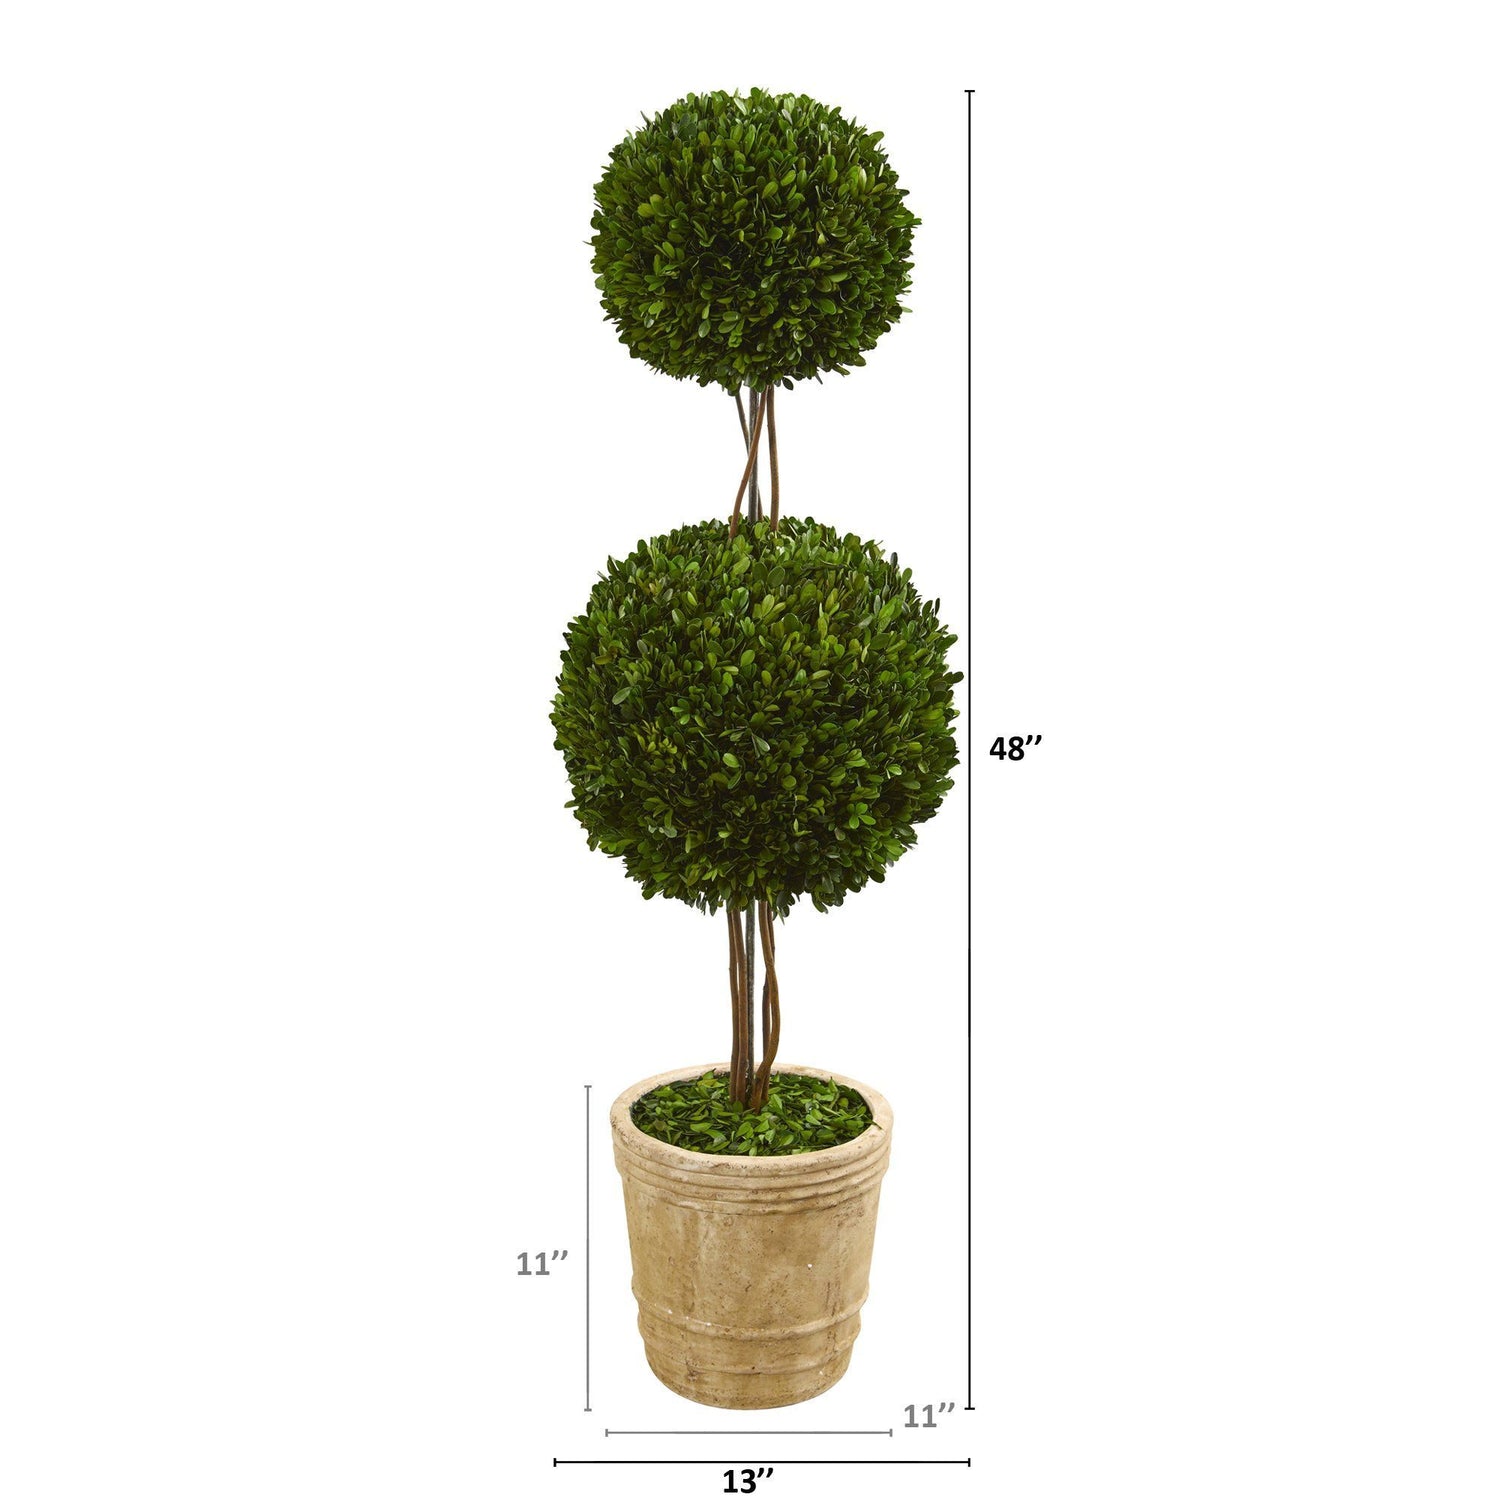 4’ Preserved Boxwood Double Ball Topiary Tree in Planter